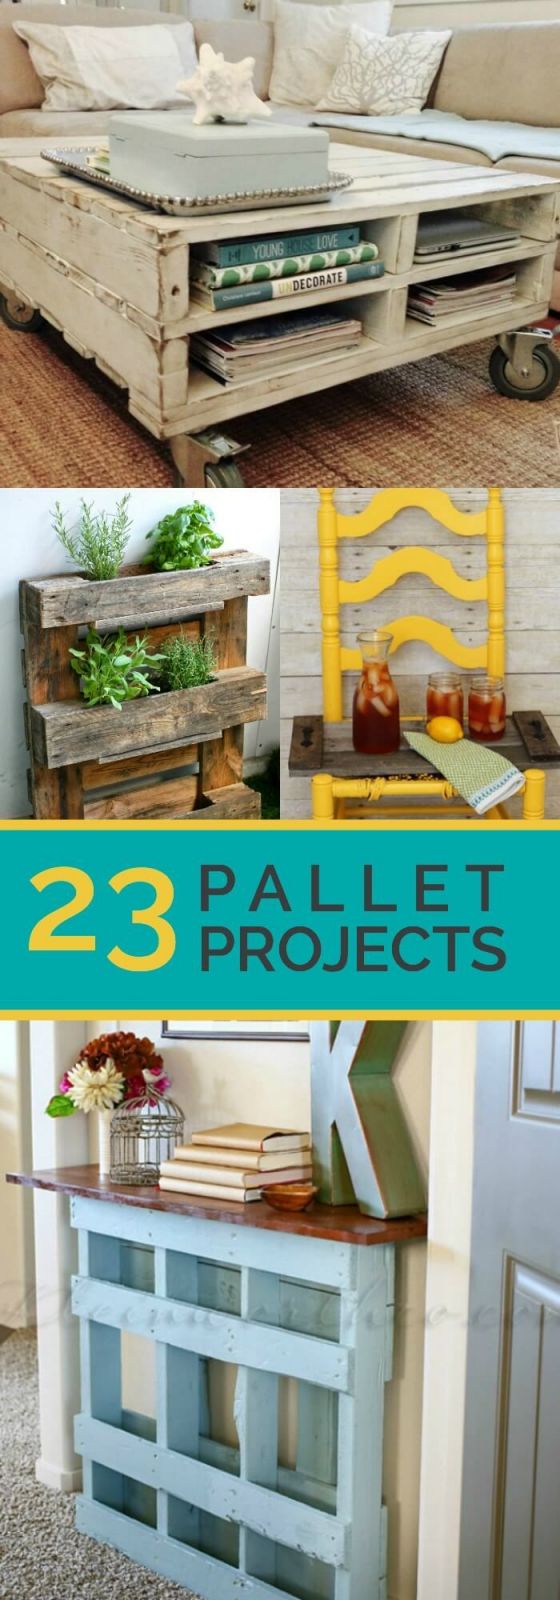  Amazing things to make from wooden pallets 